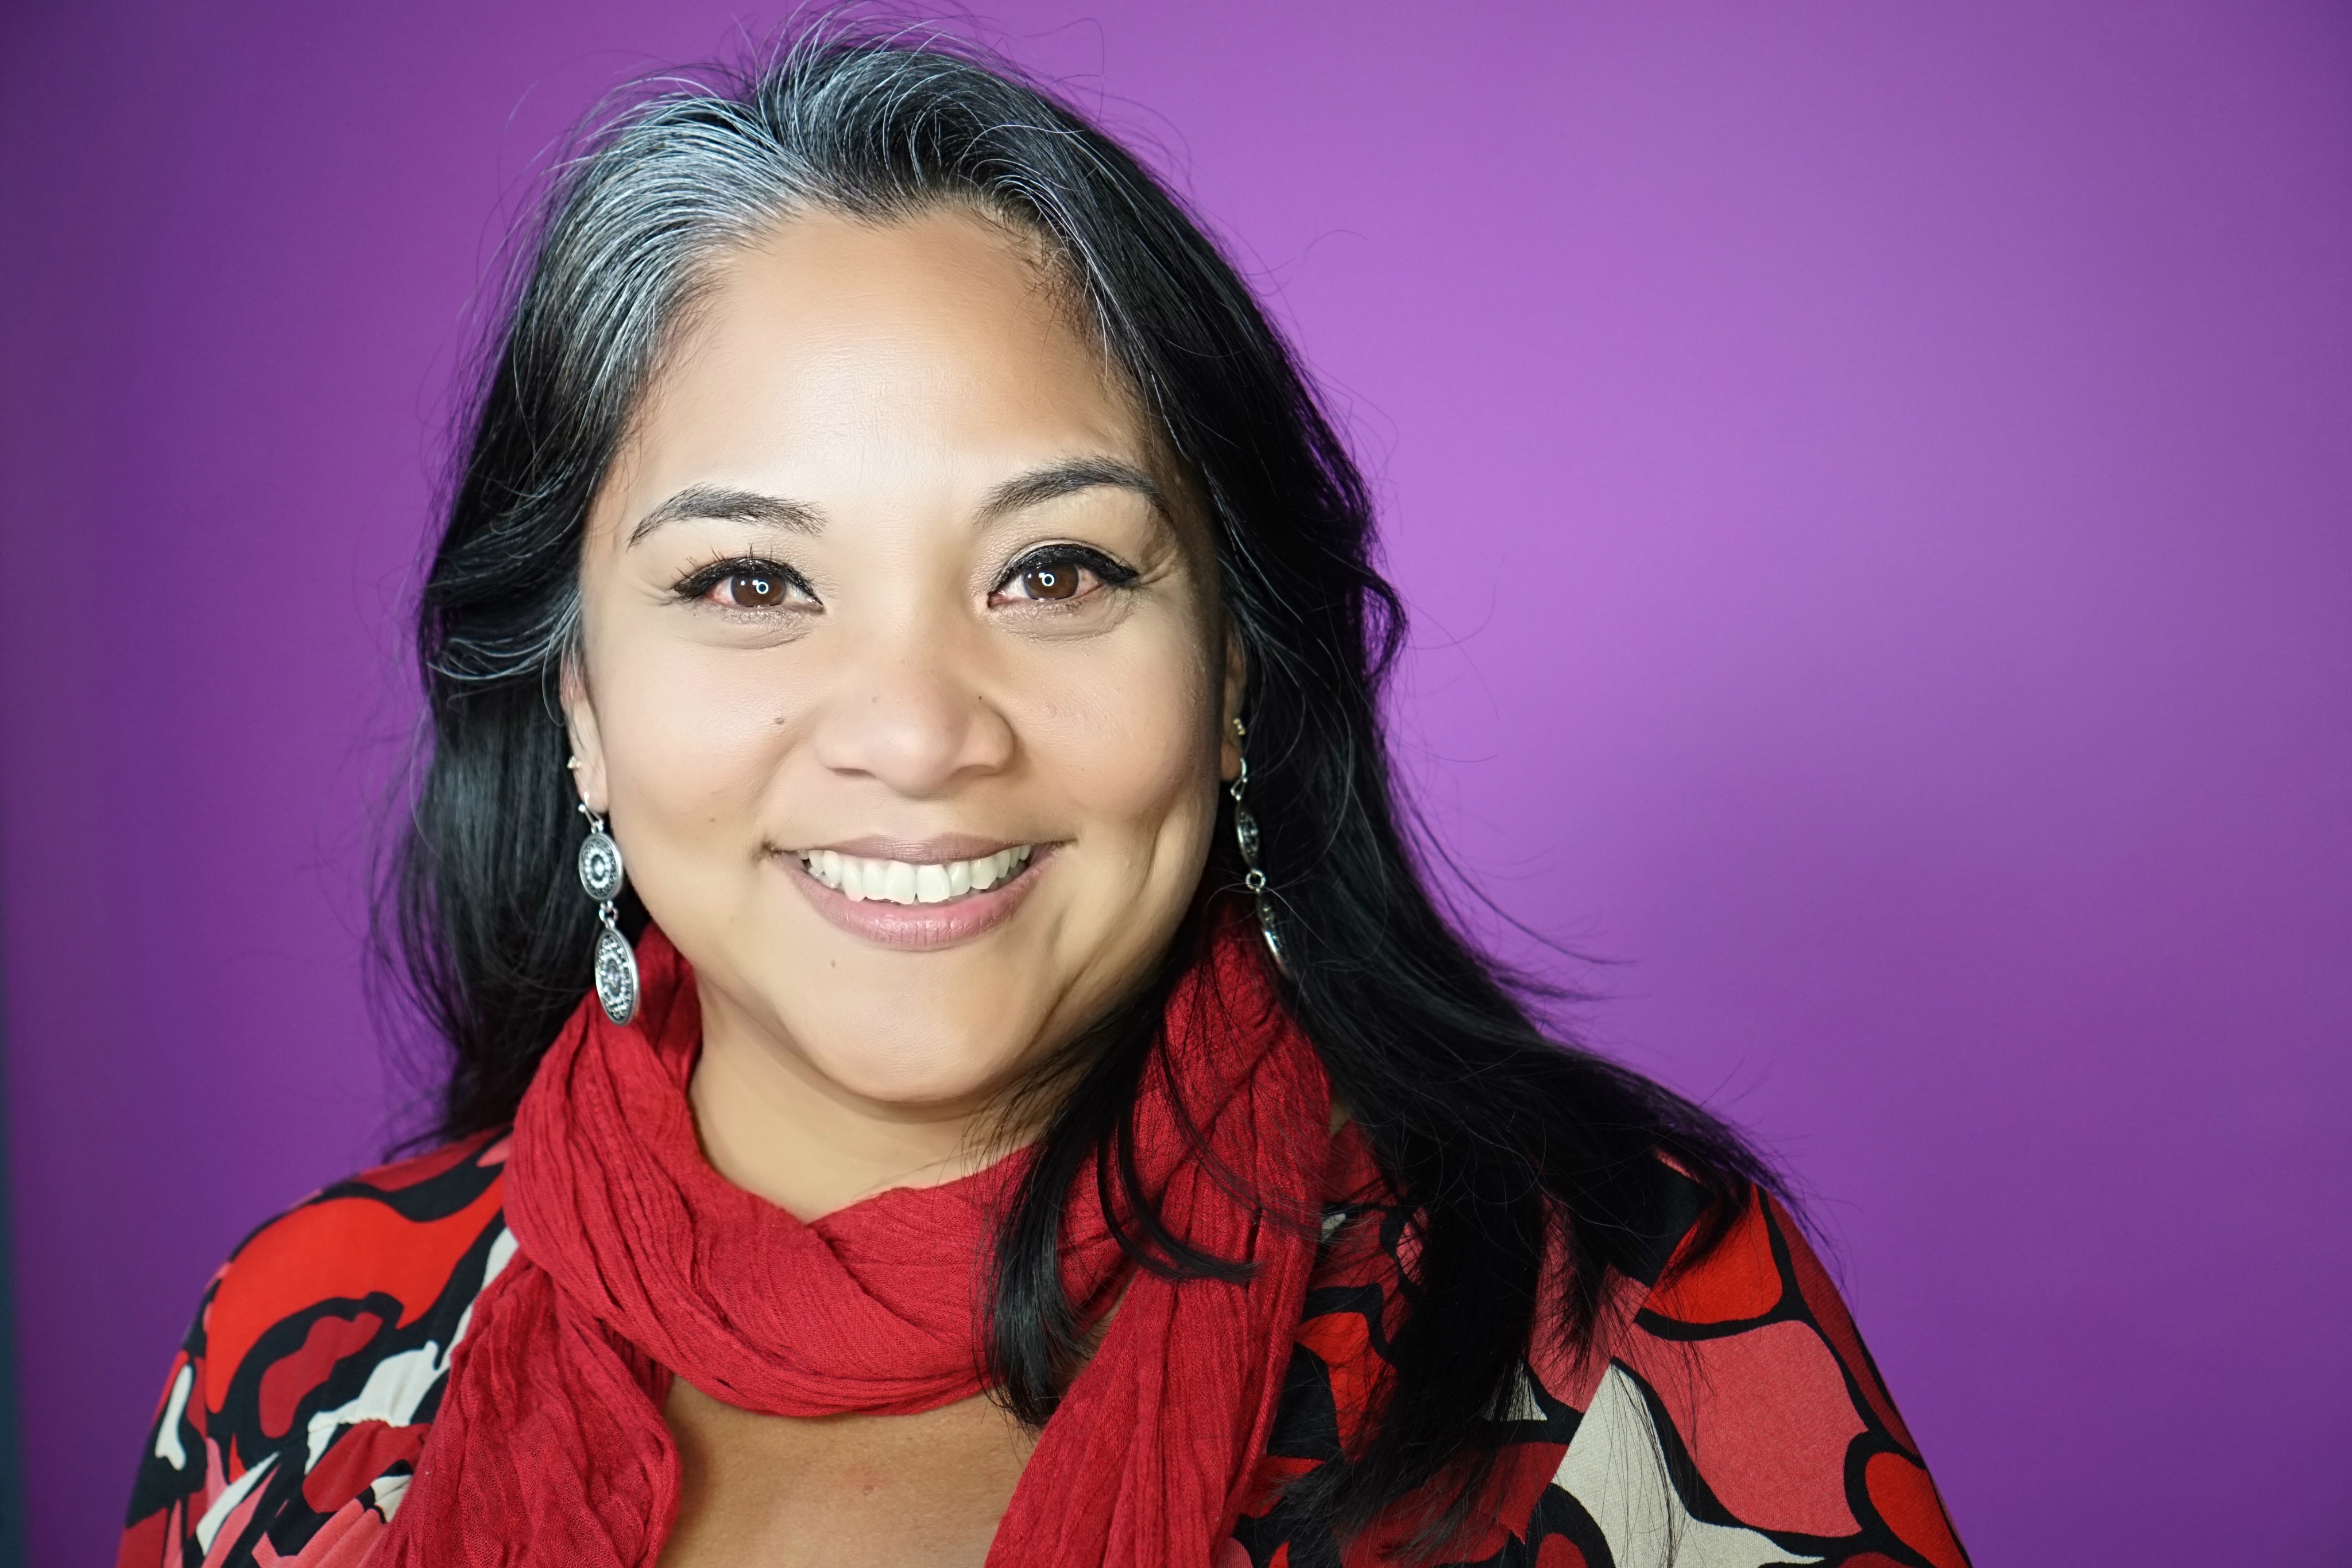 Dr. Gerry Ebalaroza-Tunnell in a bright red scarf against a vibrant purple background